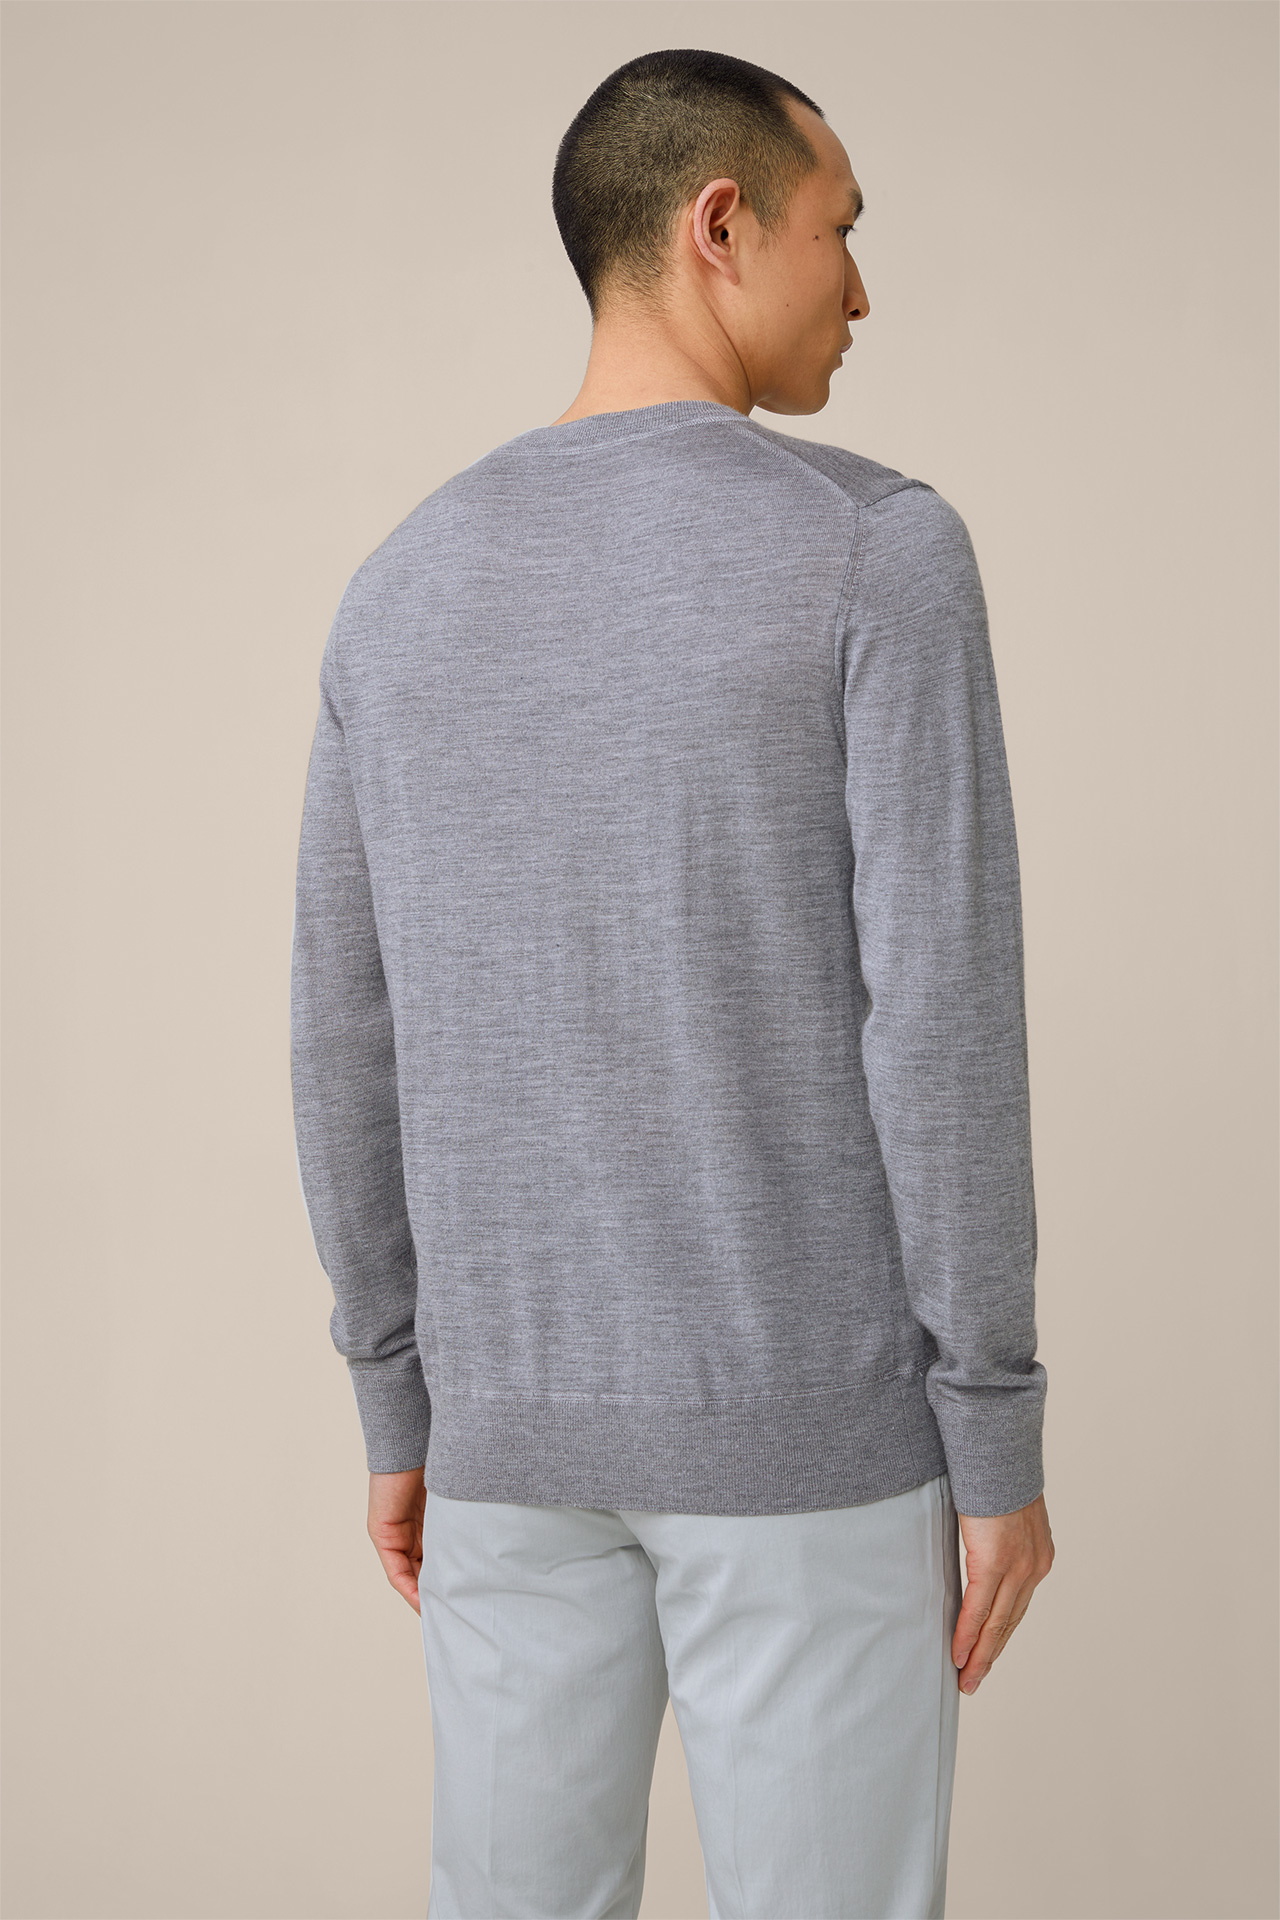 Nando Knitted Sweater with Silk and Cashmere in Mottled Grey 